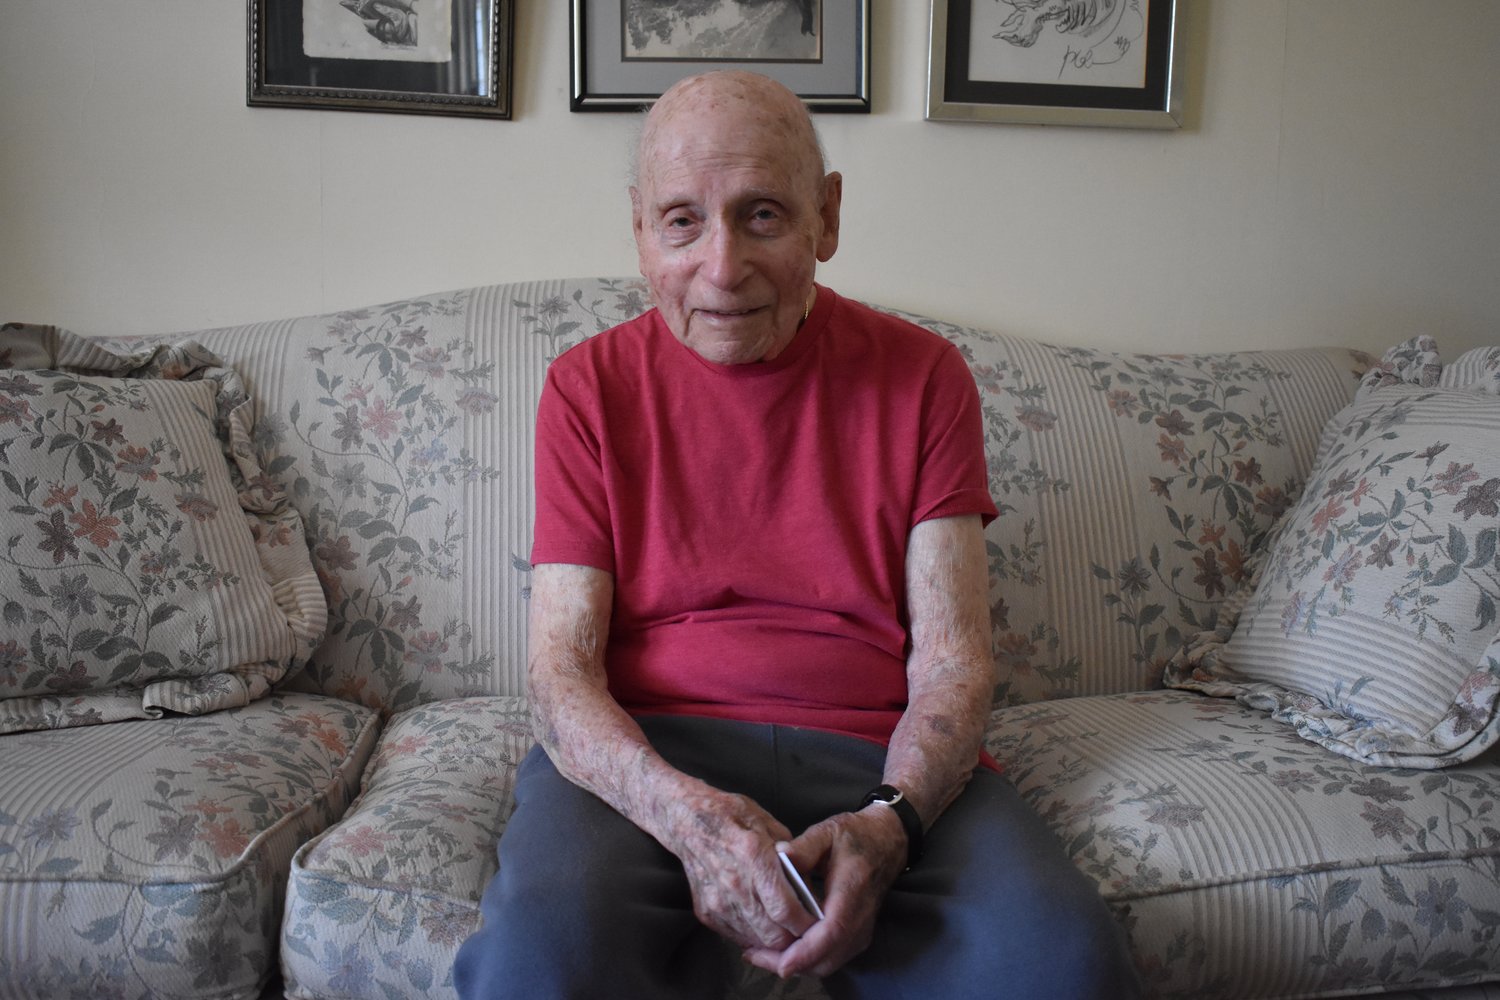 Rockville Centre resident Herbert Rosenberg, 97, served overseas in the U.S. Army Air Corps during World War II and spent more than a year as a prisoner of war.